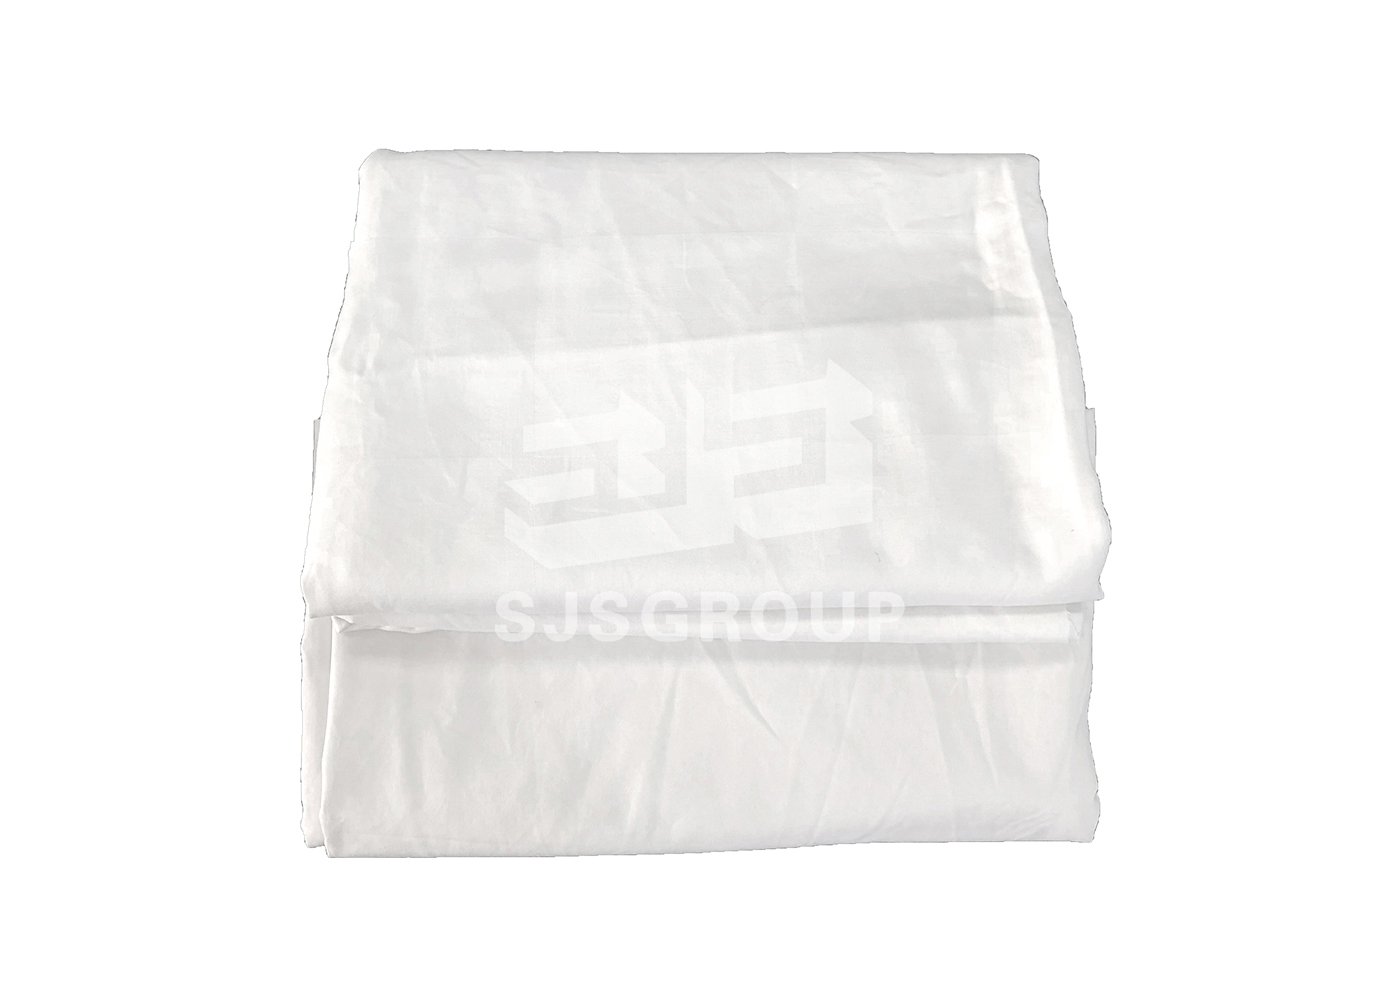 White Bed Sheet Rags-White bed sheet cotton rags (Regular Size)